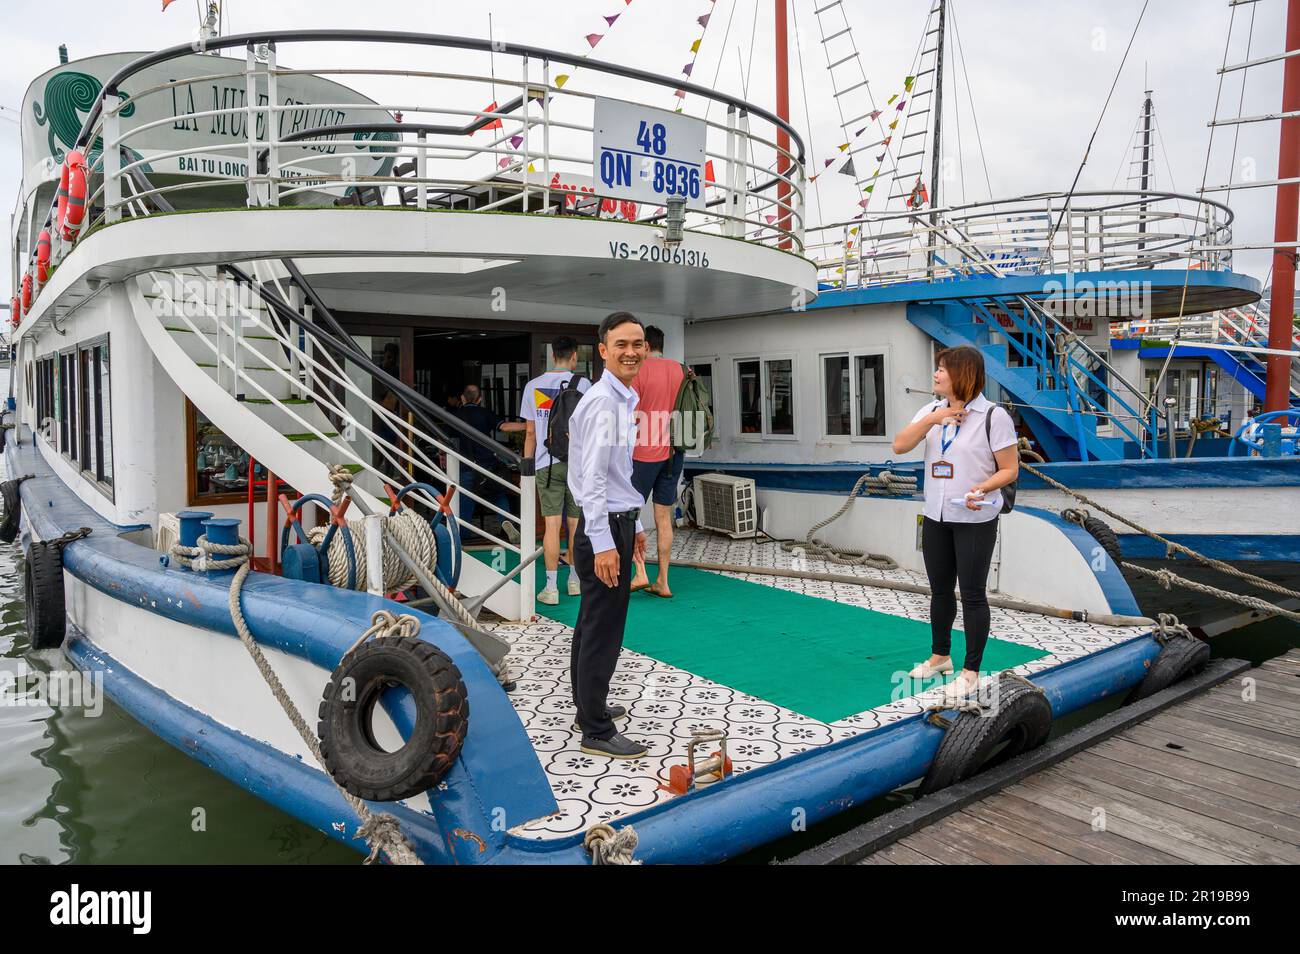 The captain and guide welcome passengers onto the La Muse Cruise boat ready to sail into the Bai Tu Long Bay in the Halong Bay archipelago, Vietnam. Stock Photo